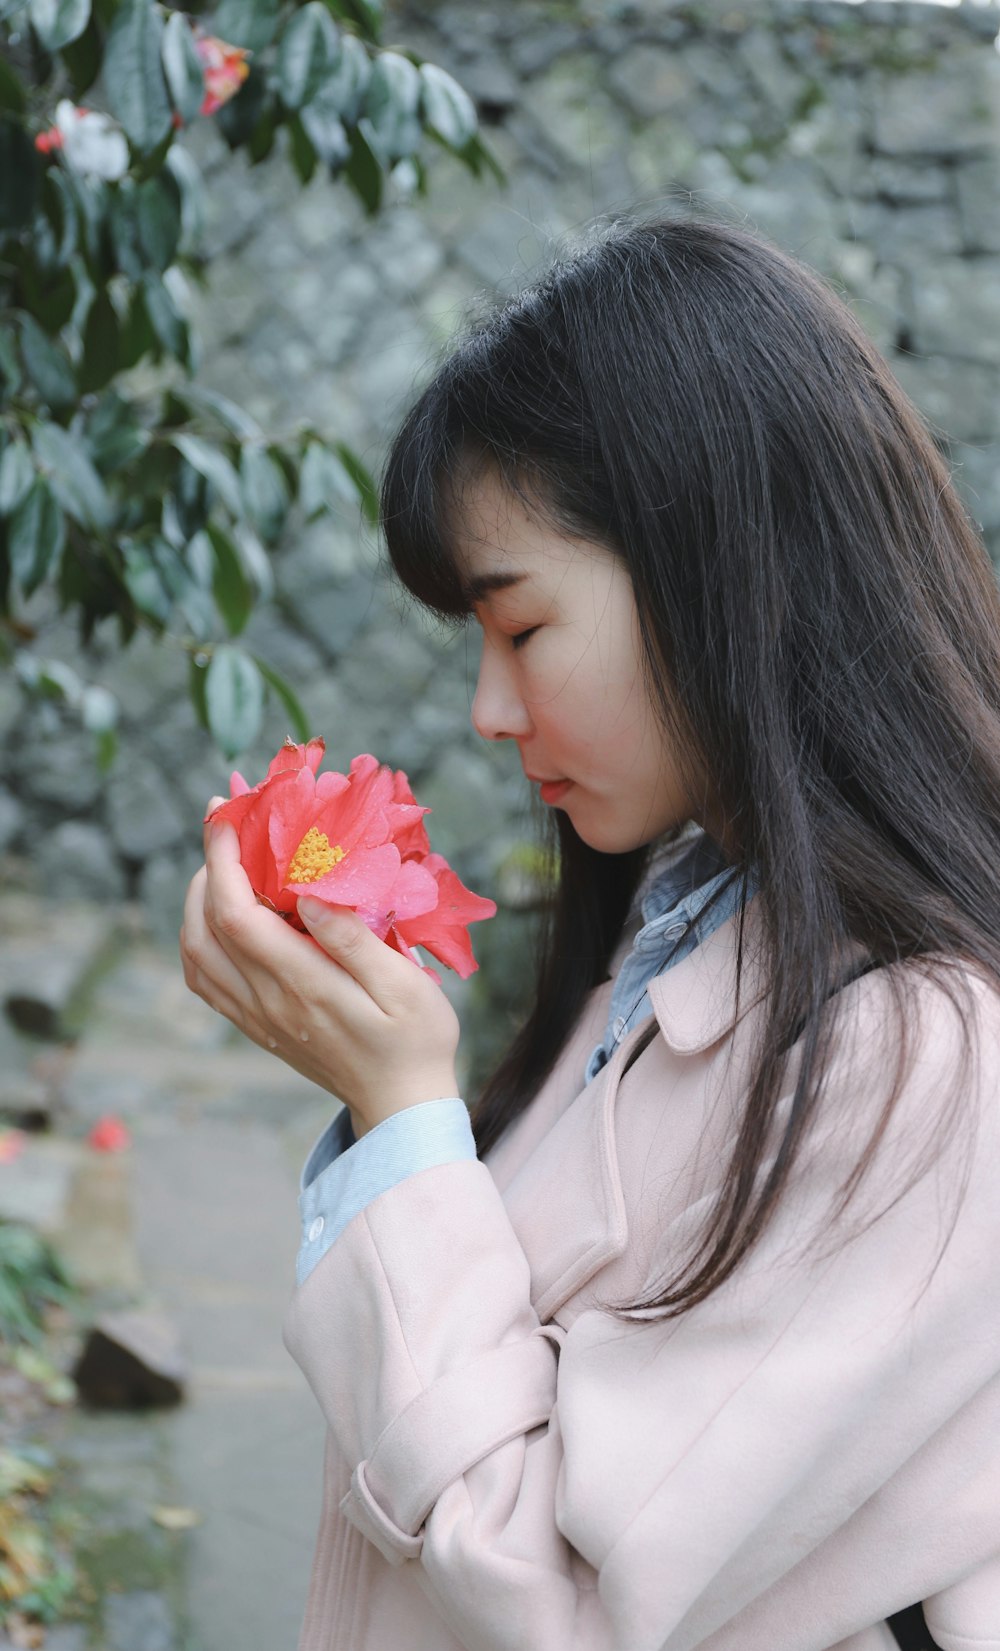 woman sniffing flower on her hands